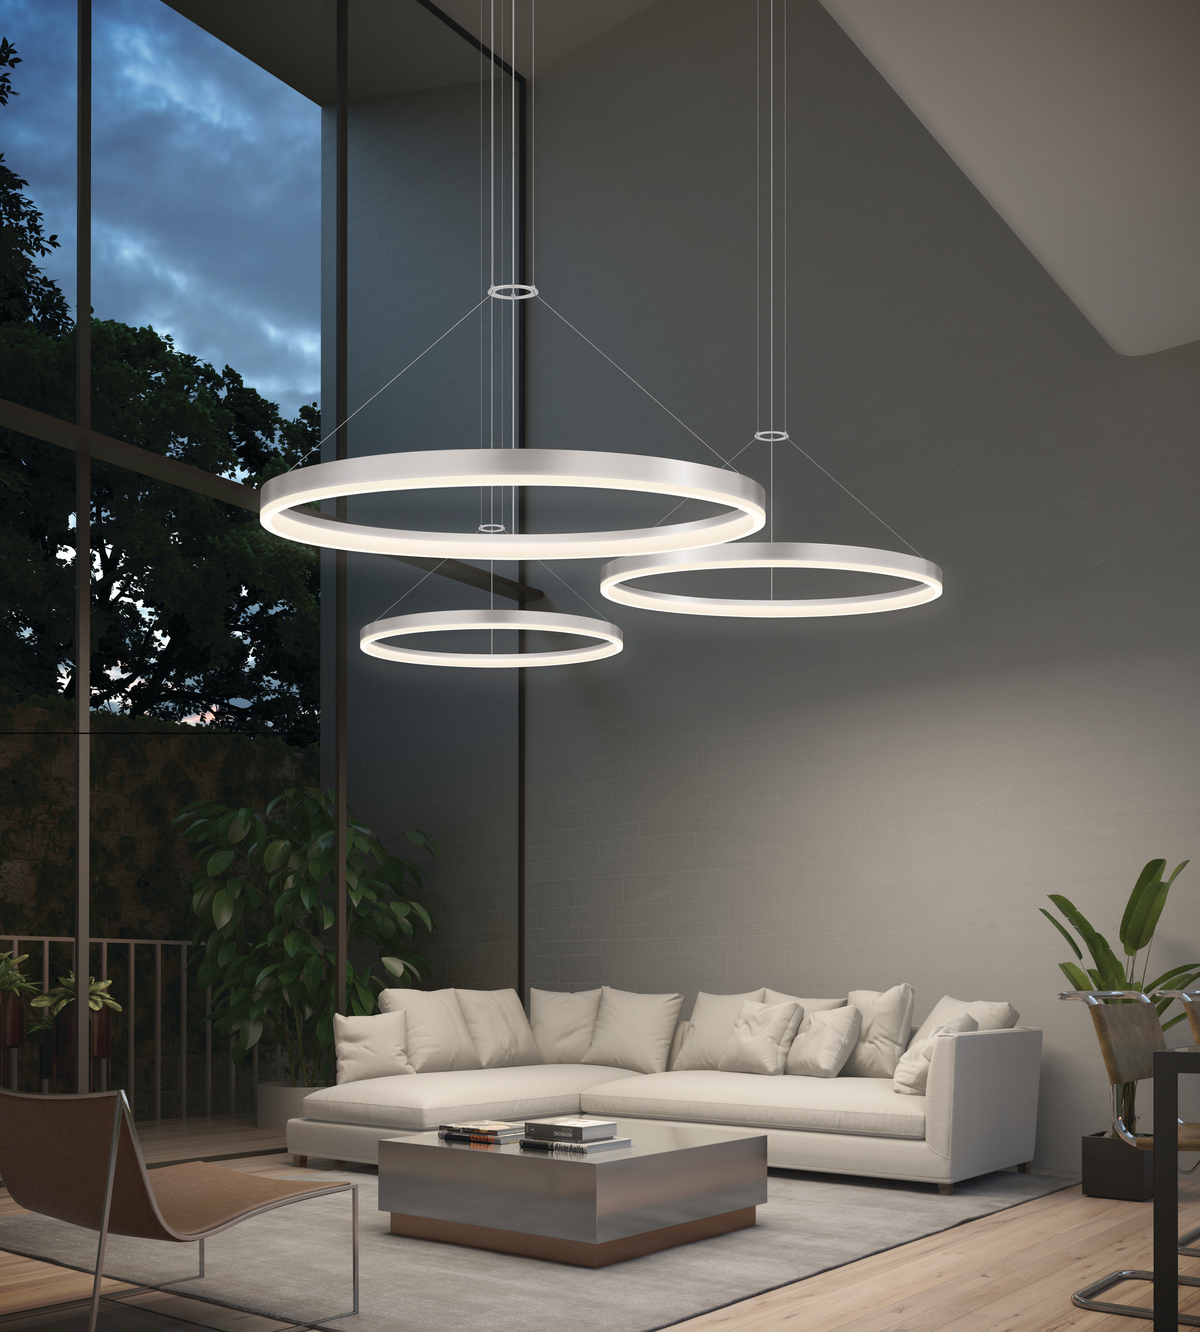 Three circular lighting fixtures over white leather sectional sofa